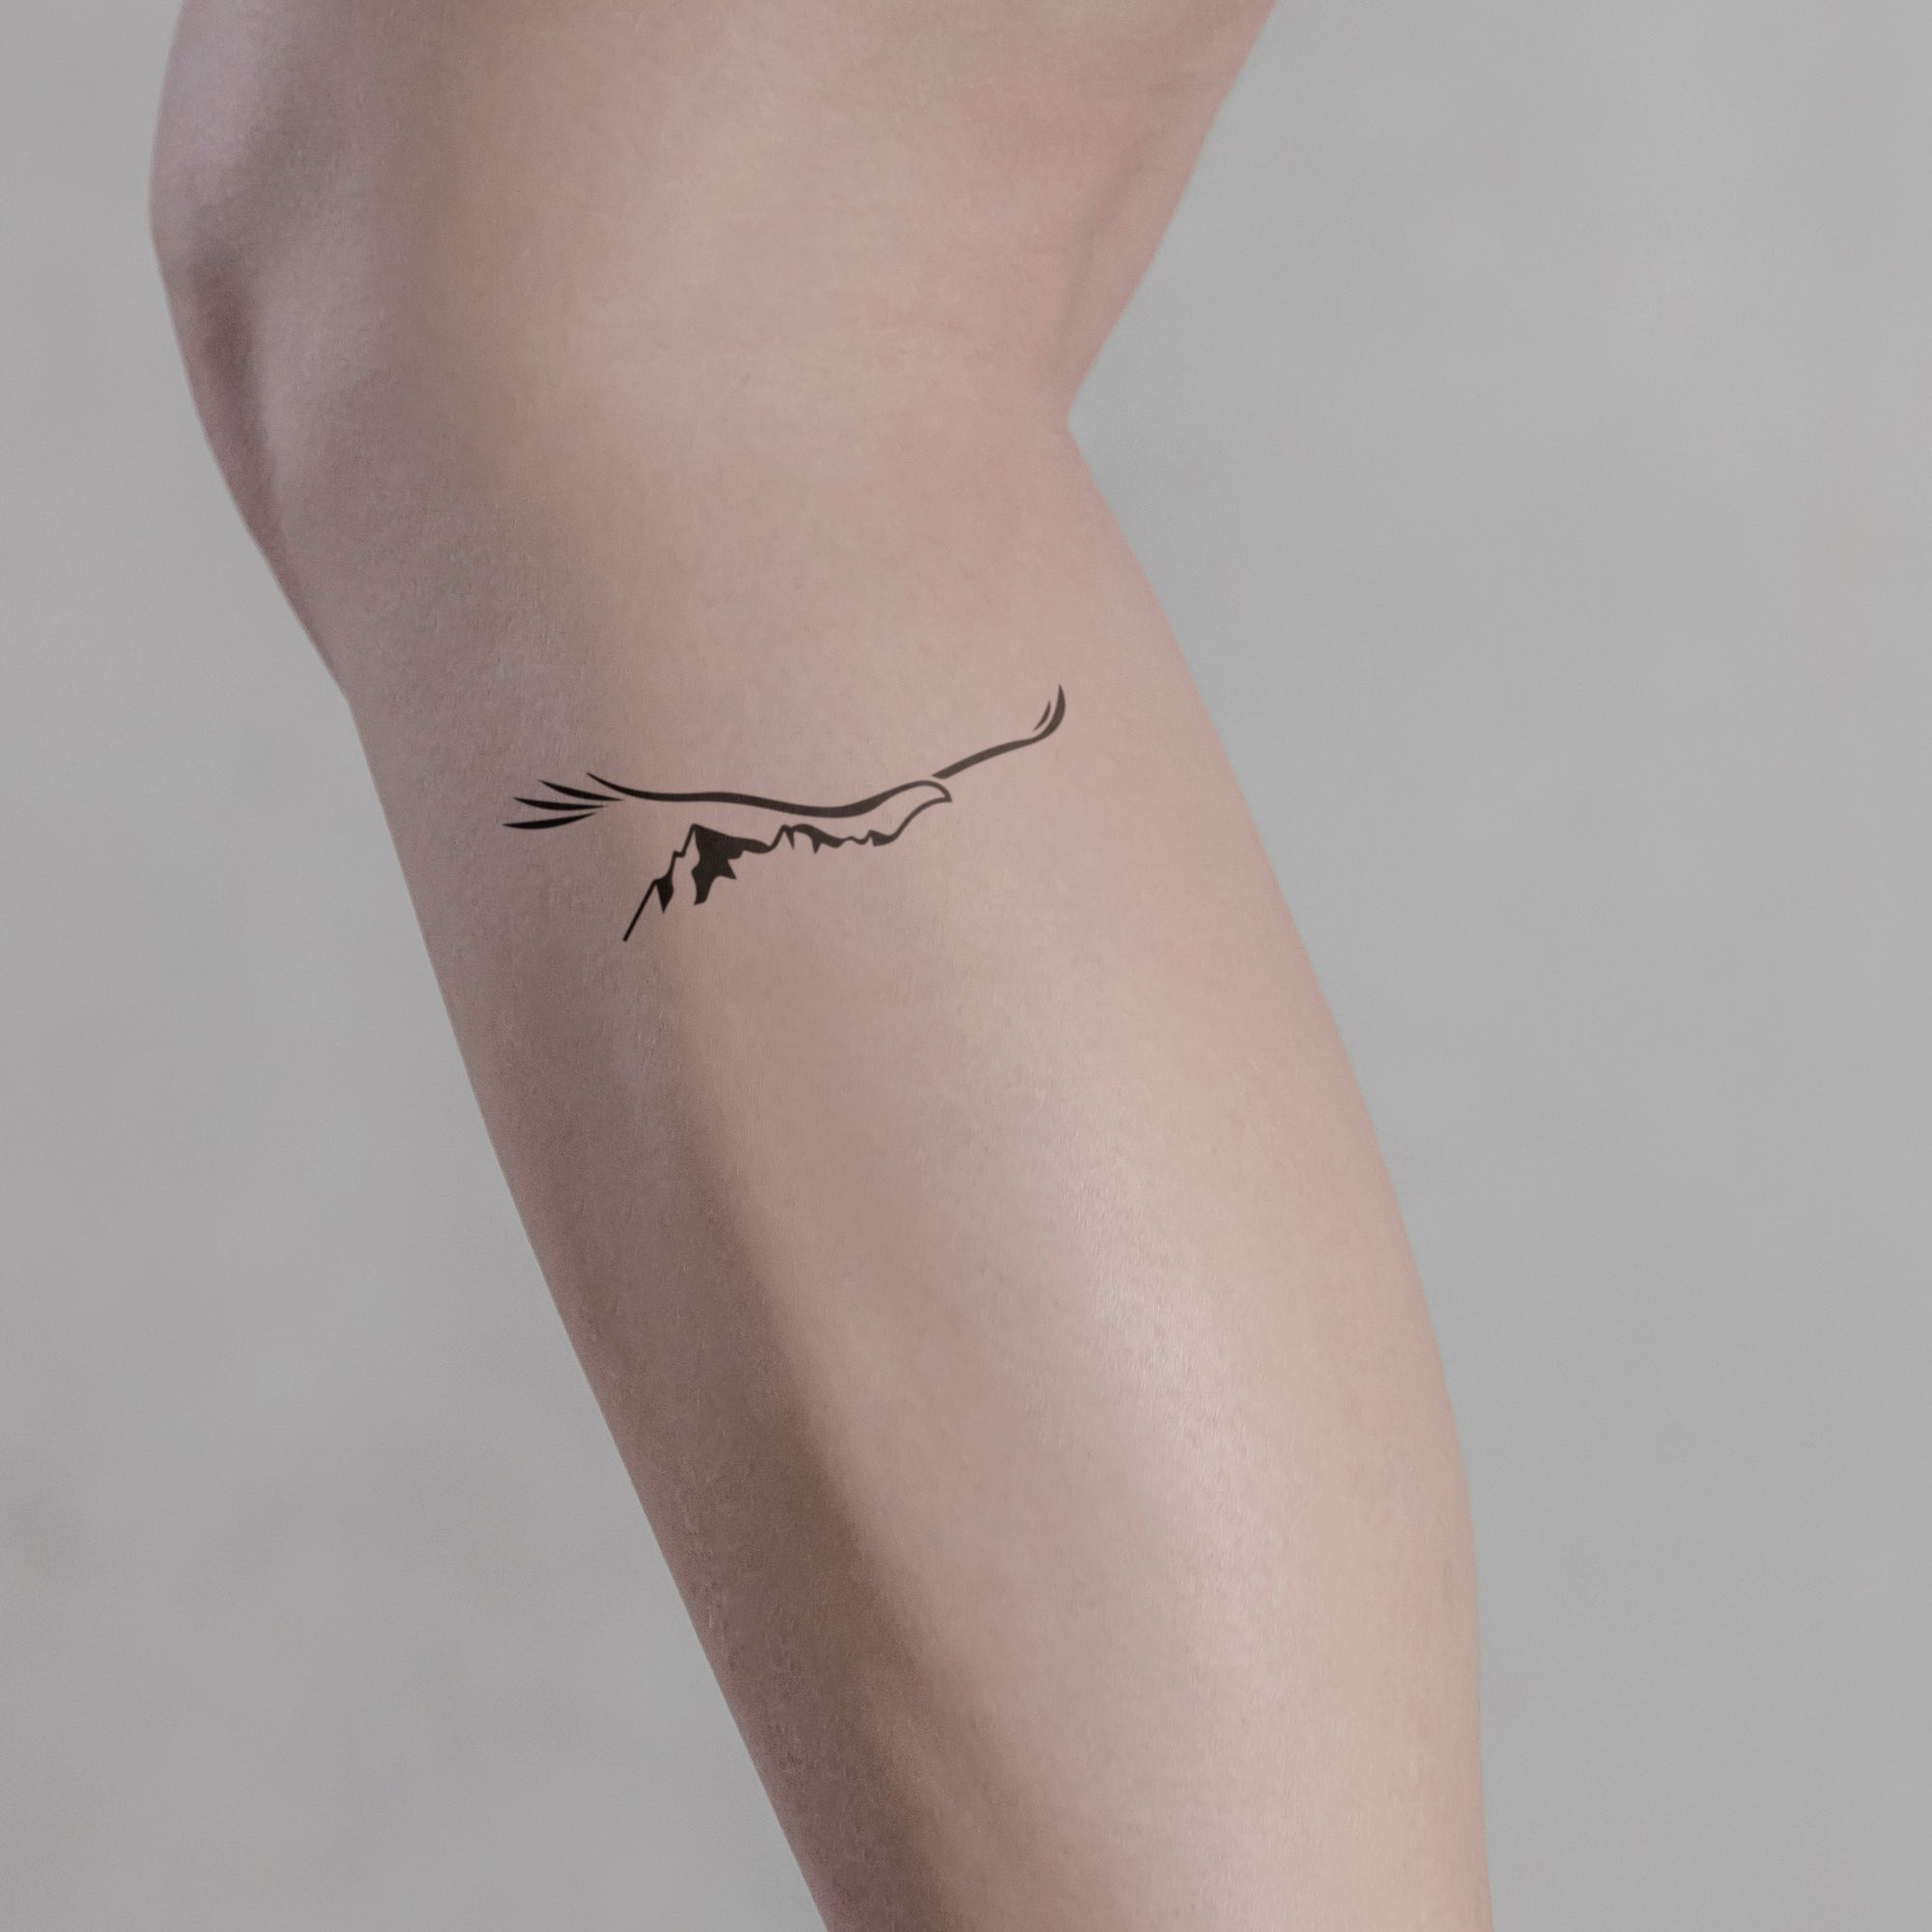 How The Nature Tattoo Has Become 2022's Hottest Fashion Accessory